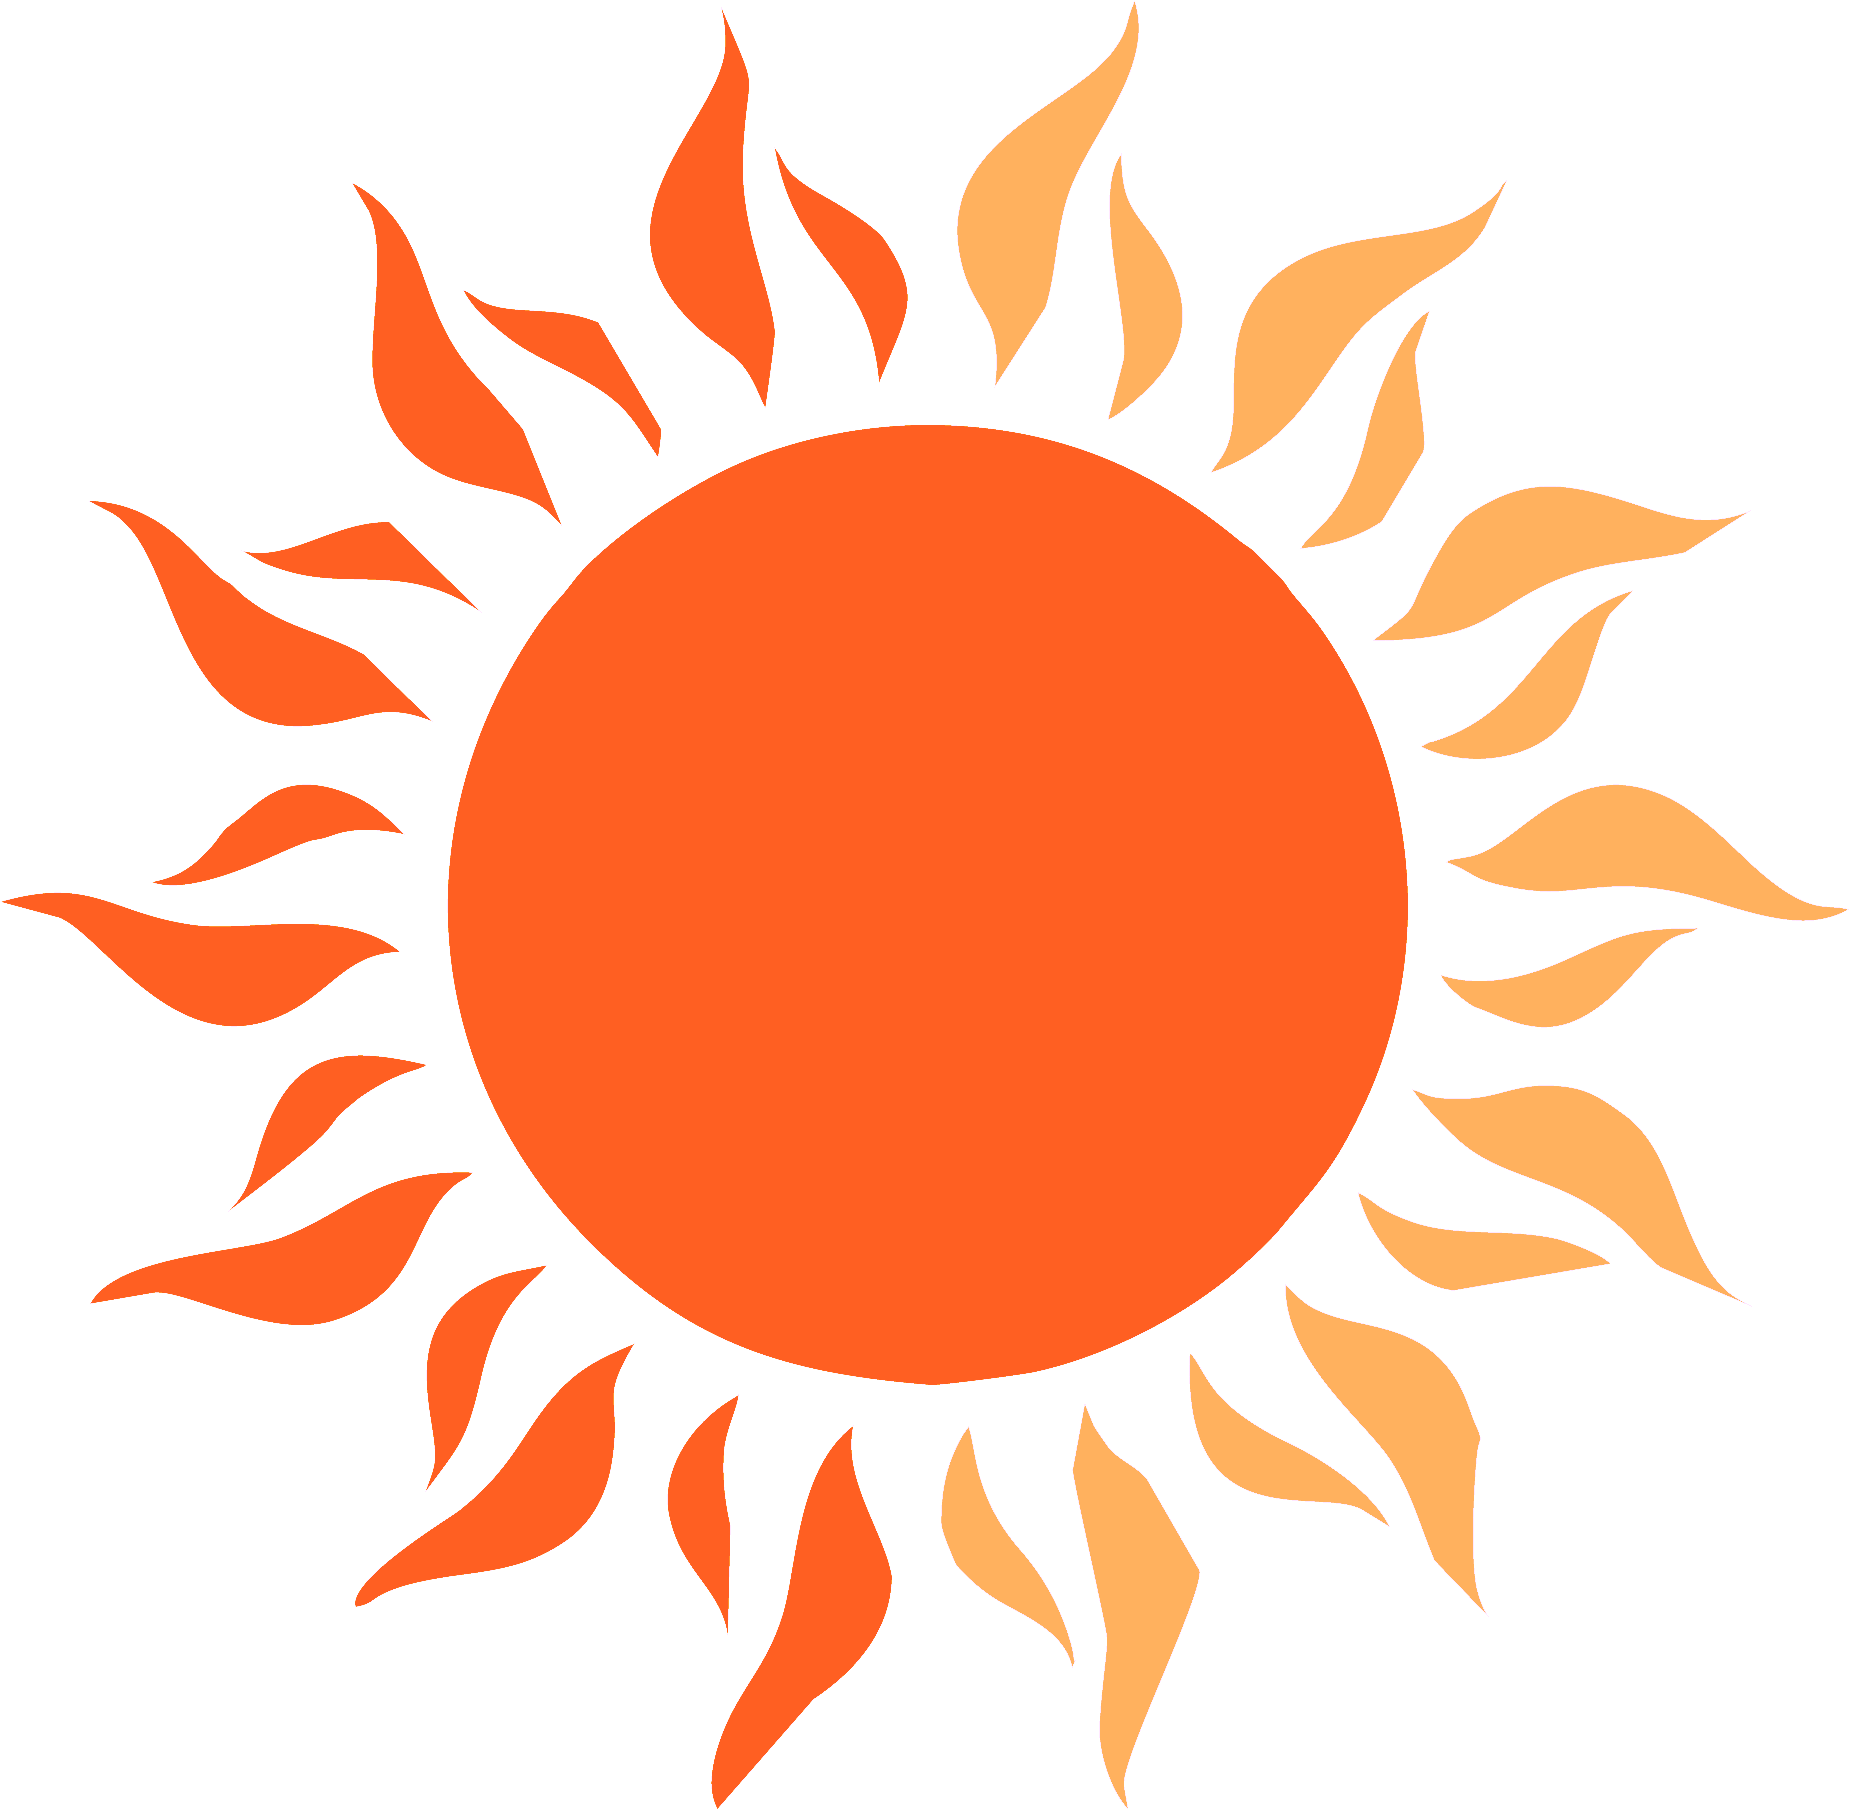 A Sun With Flames On It